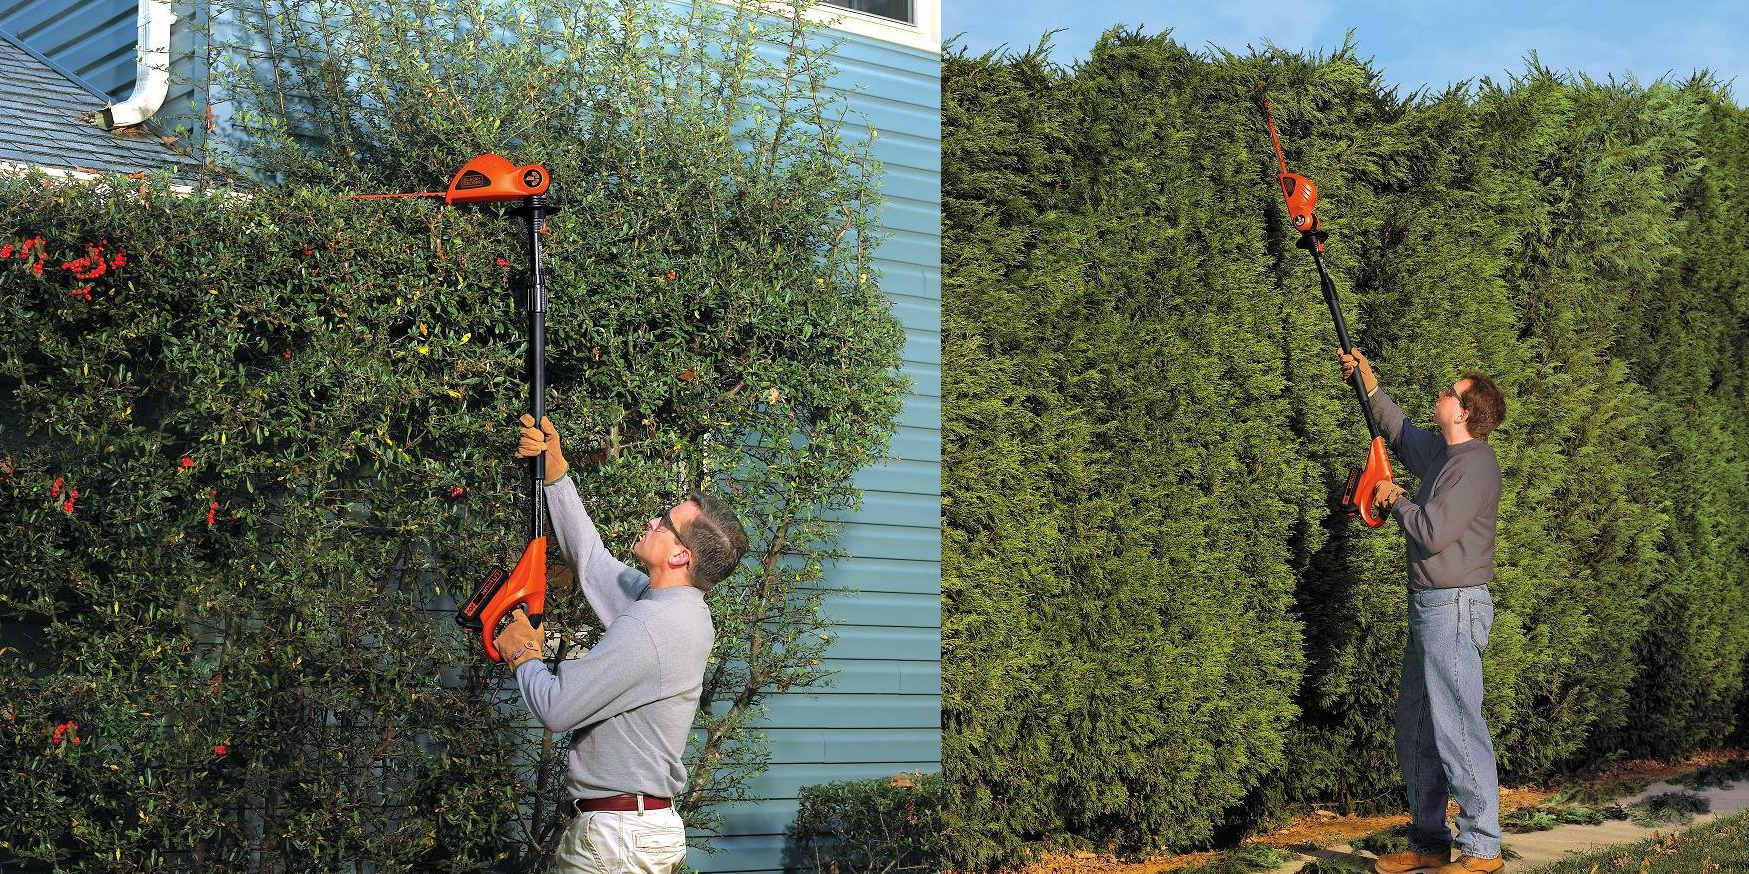 black and decker electric tree trimmer